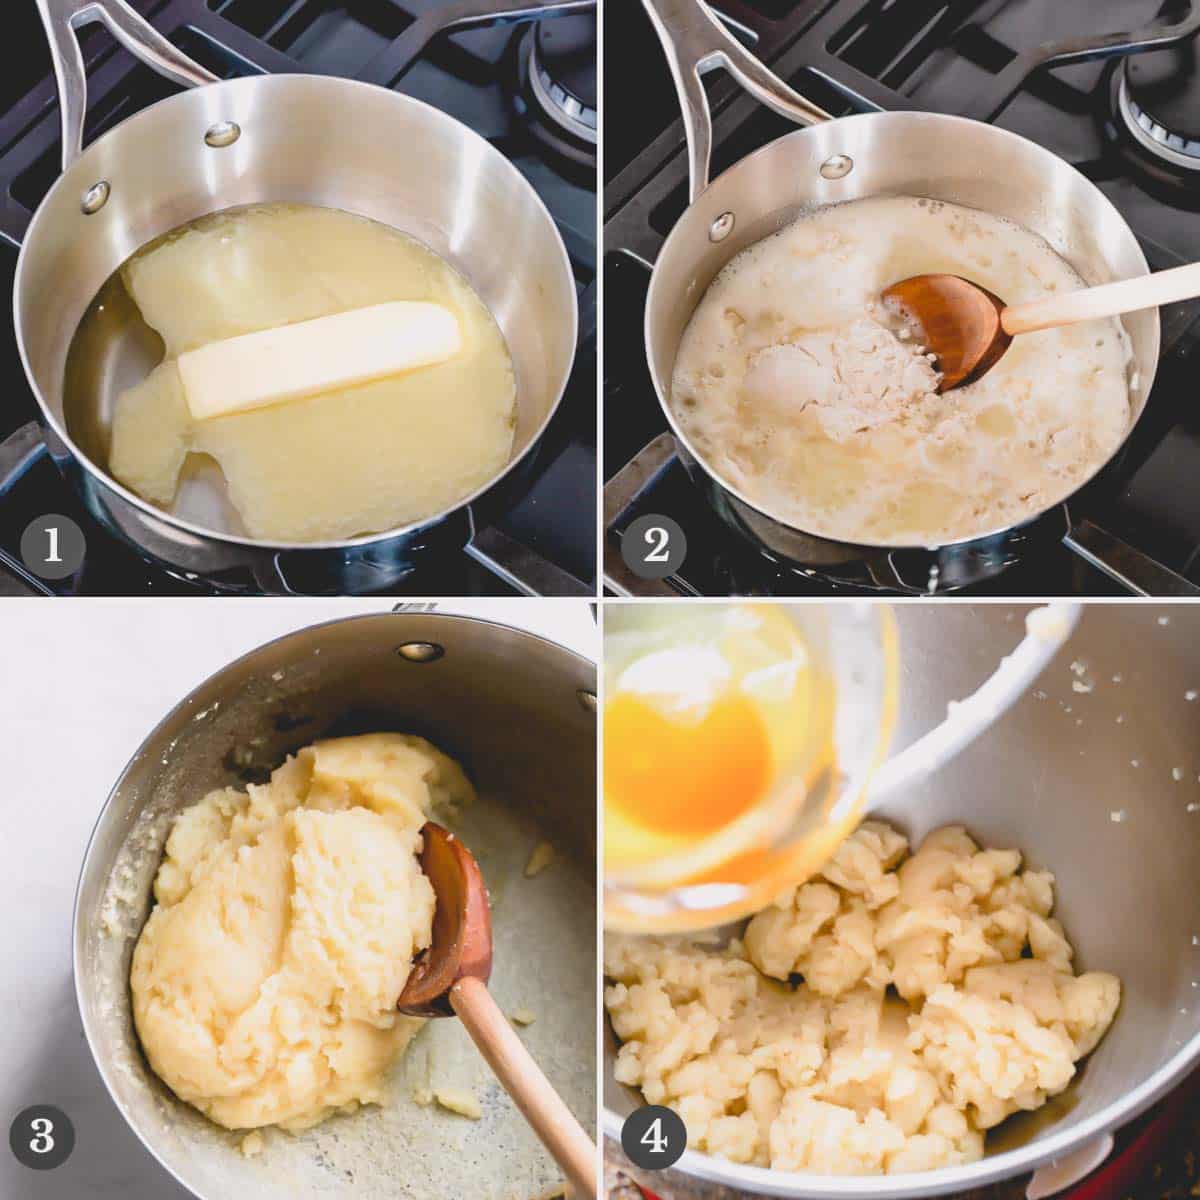 Step by step photos of making eclair dough.